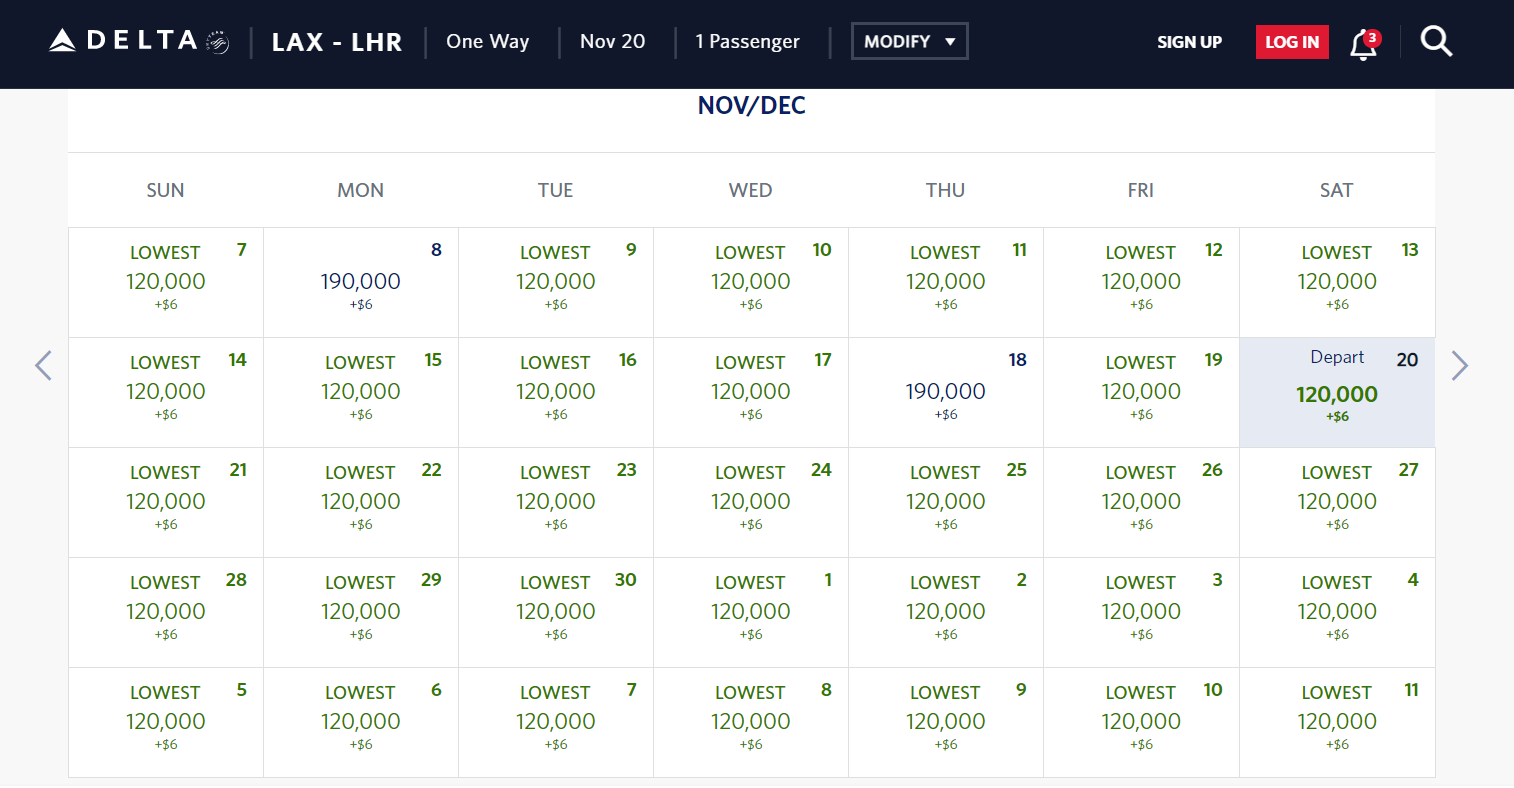 Premium cabin Delta pricing between LAX and LHR